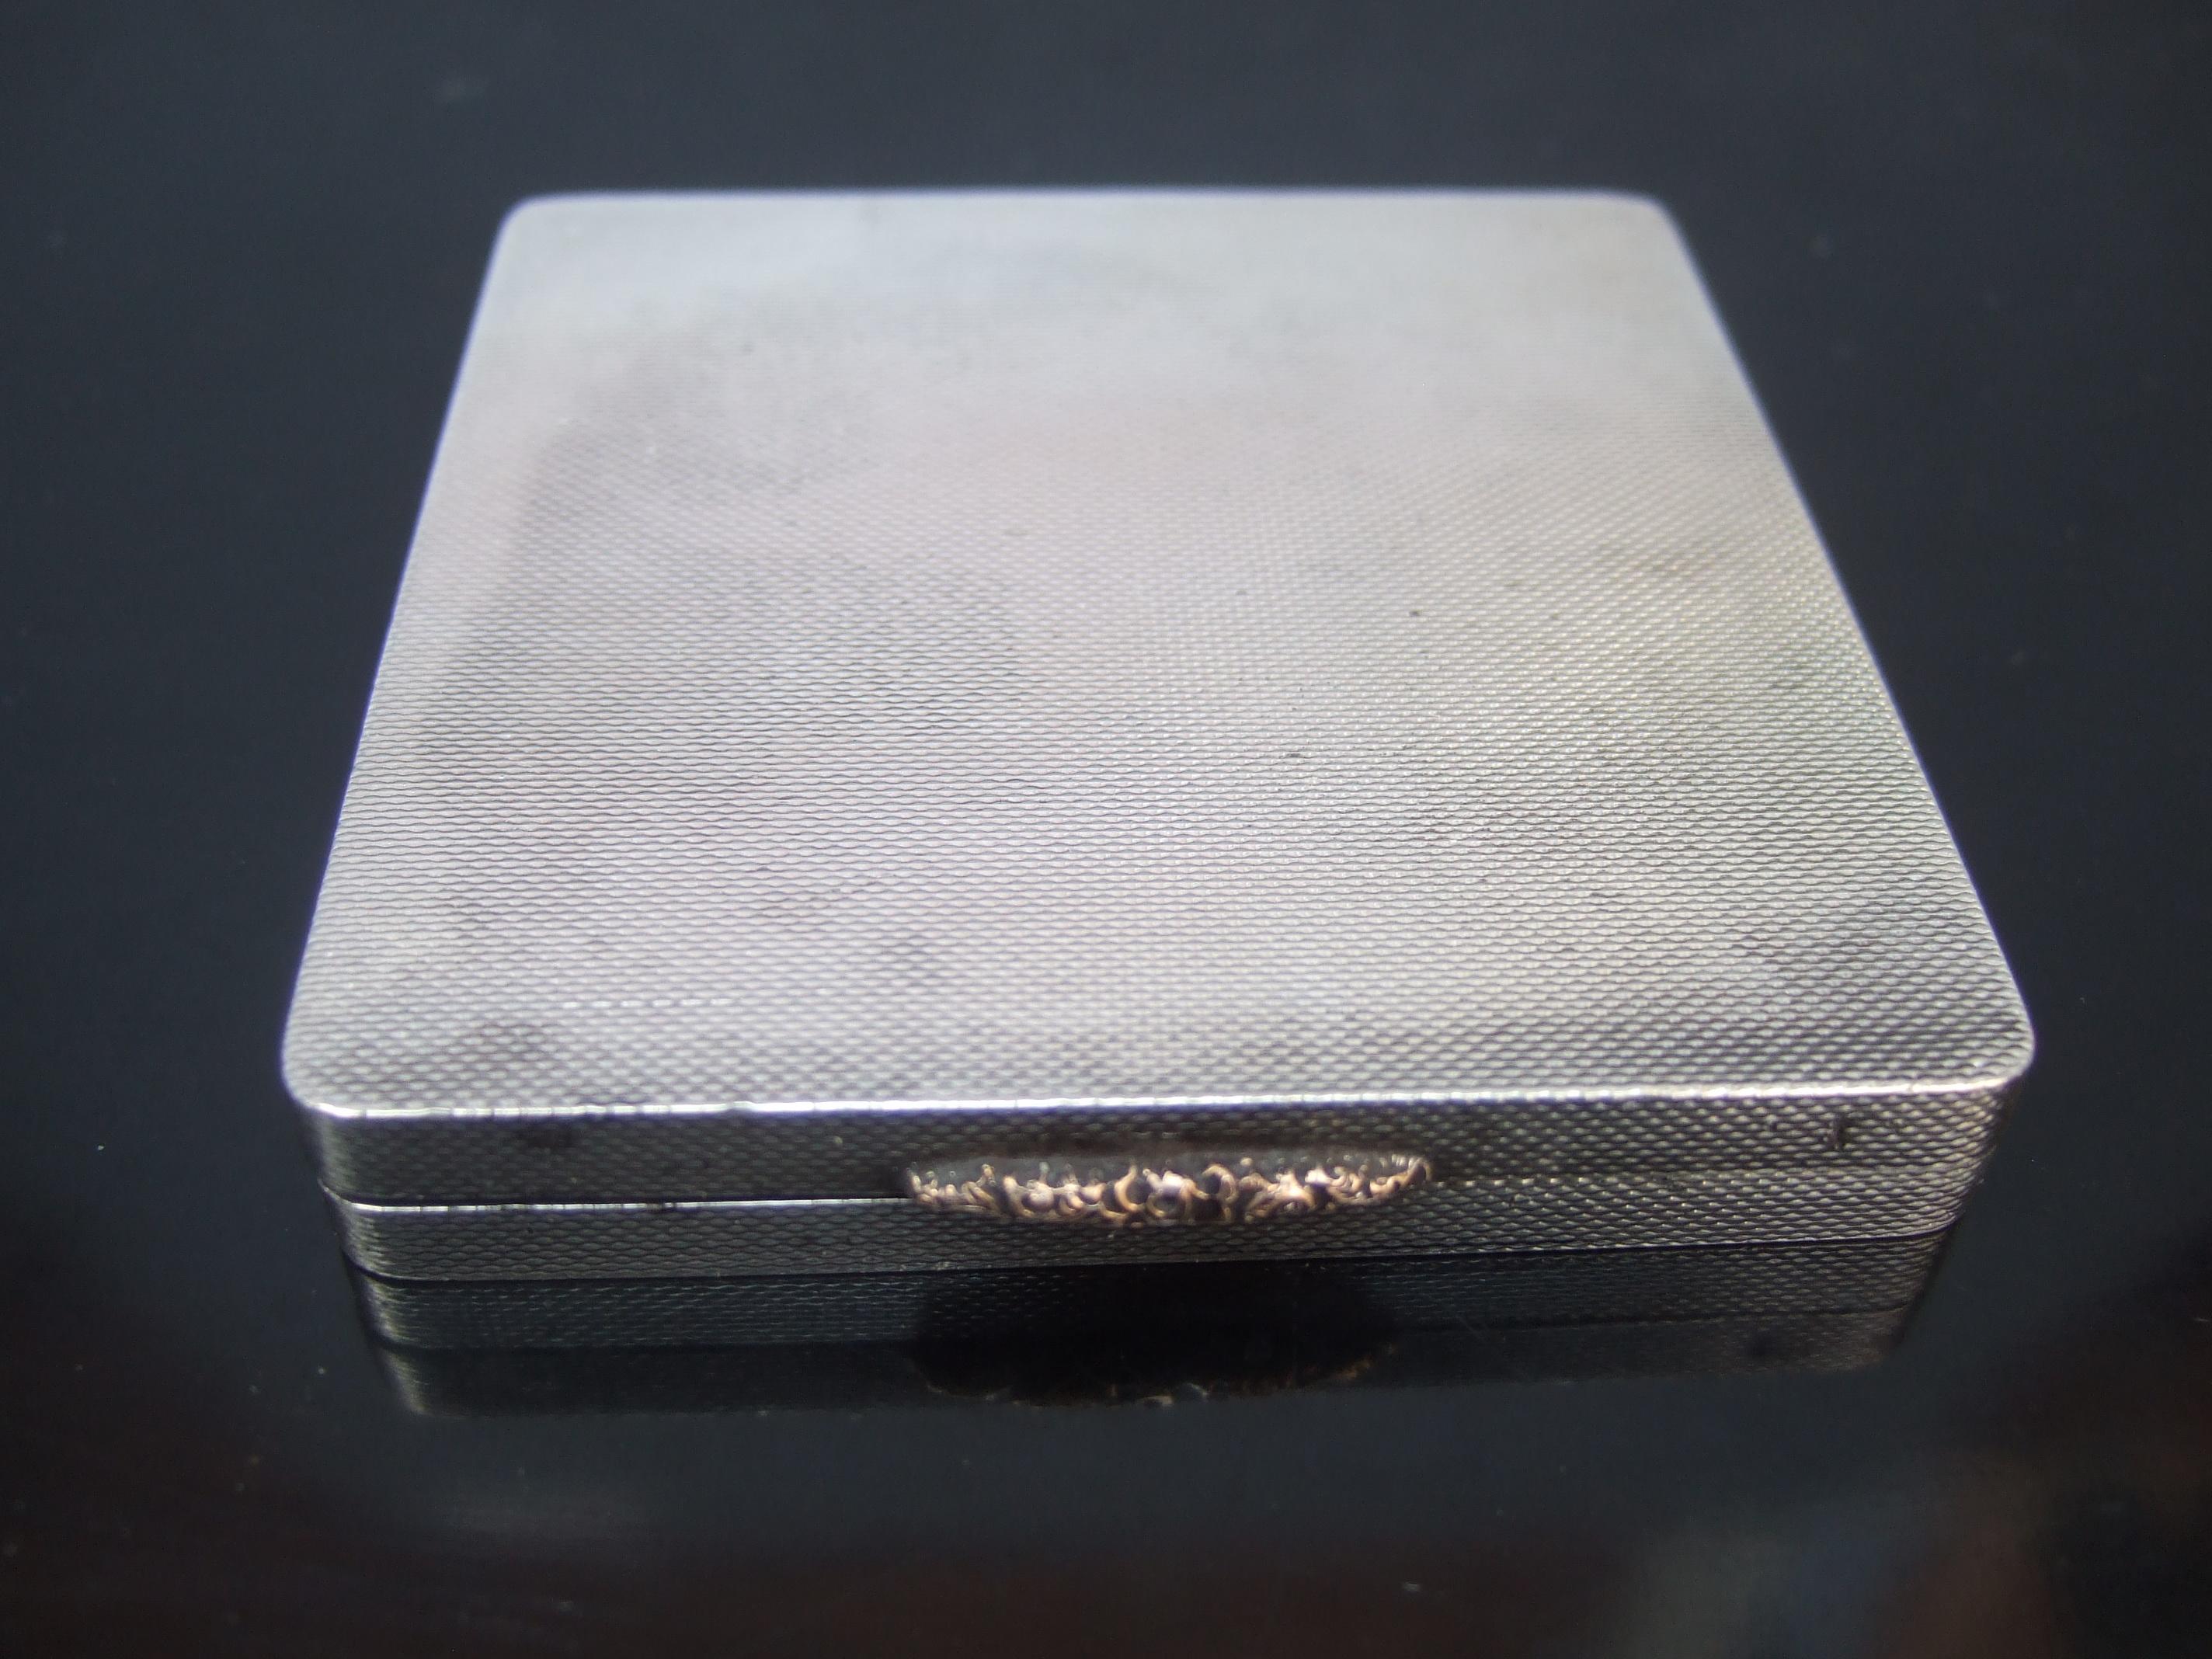 Asprey London Sterling silver opulent art deco vanity compact c 1920s
The elegant vintage compact is designed with sterling silver 
The sterling panels have a very subtle intricate geometric design 

The interior is designed with a matching sterling